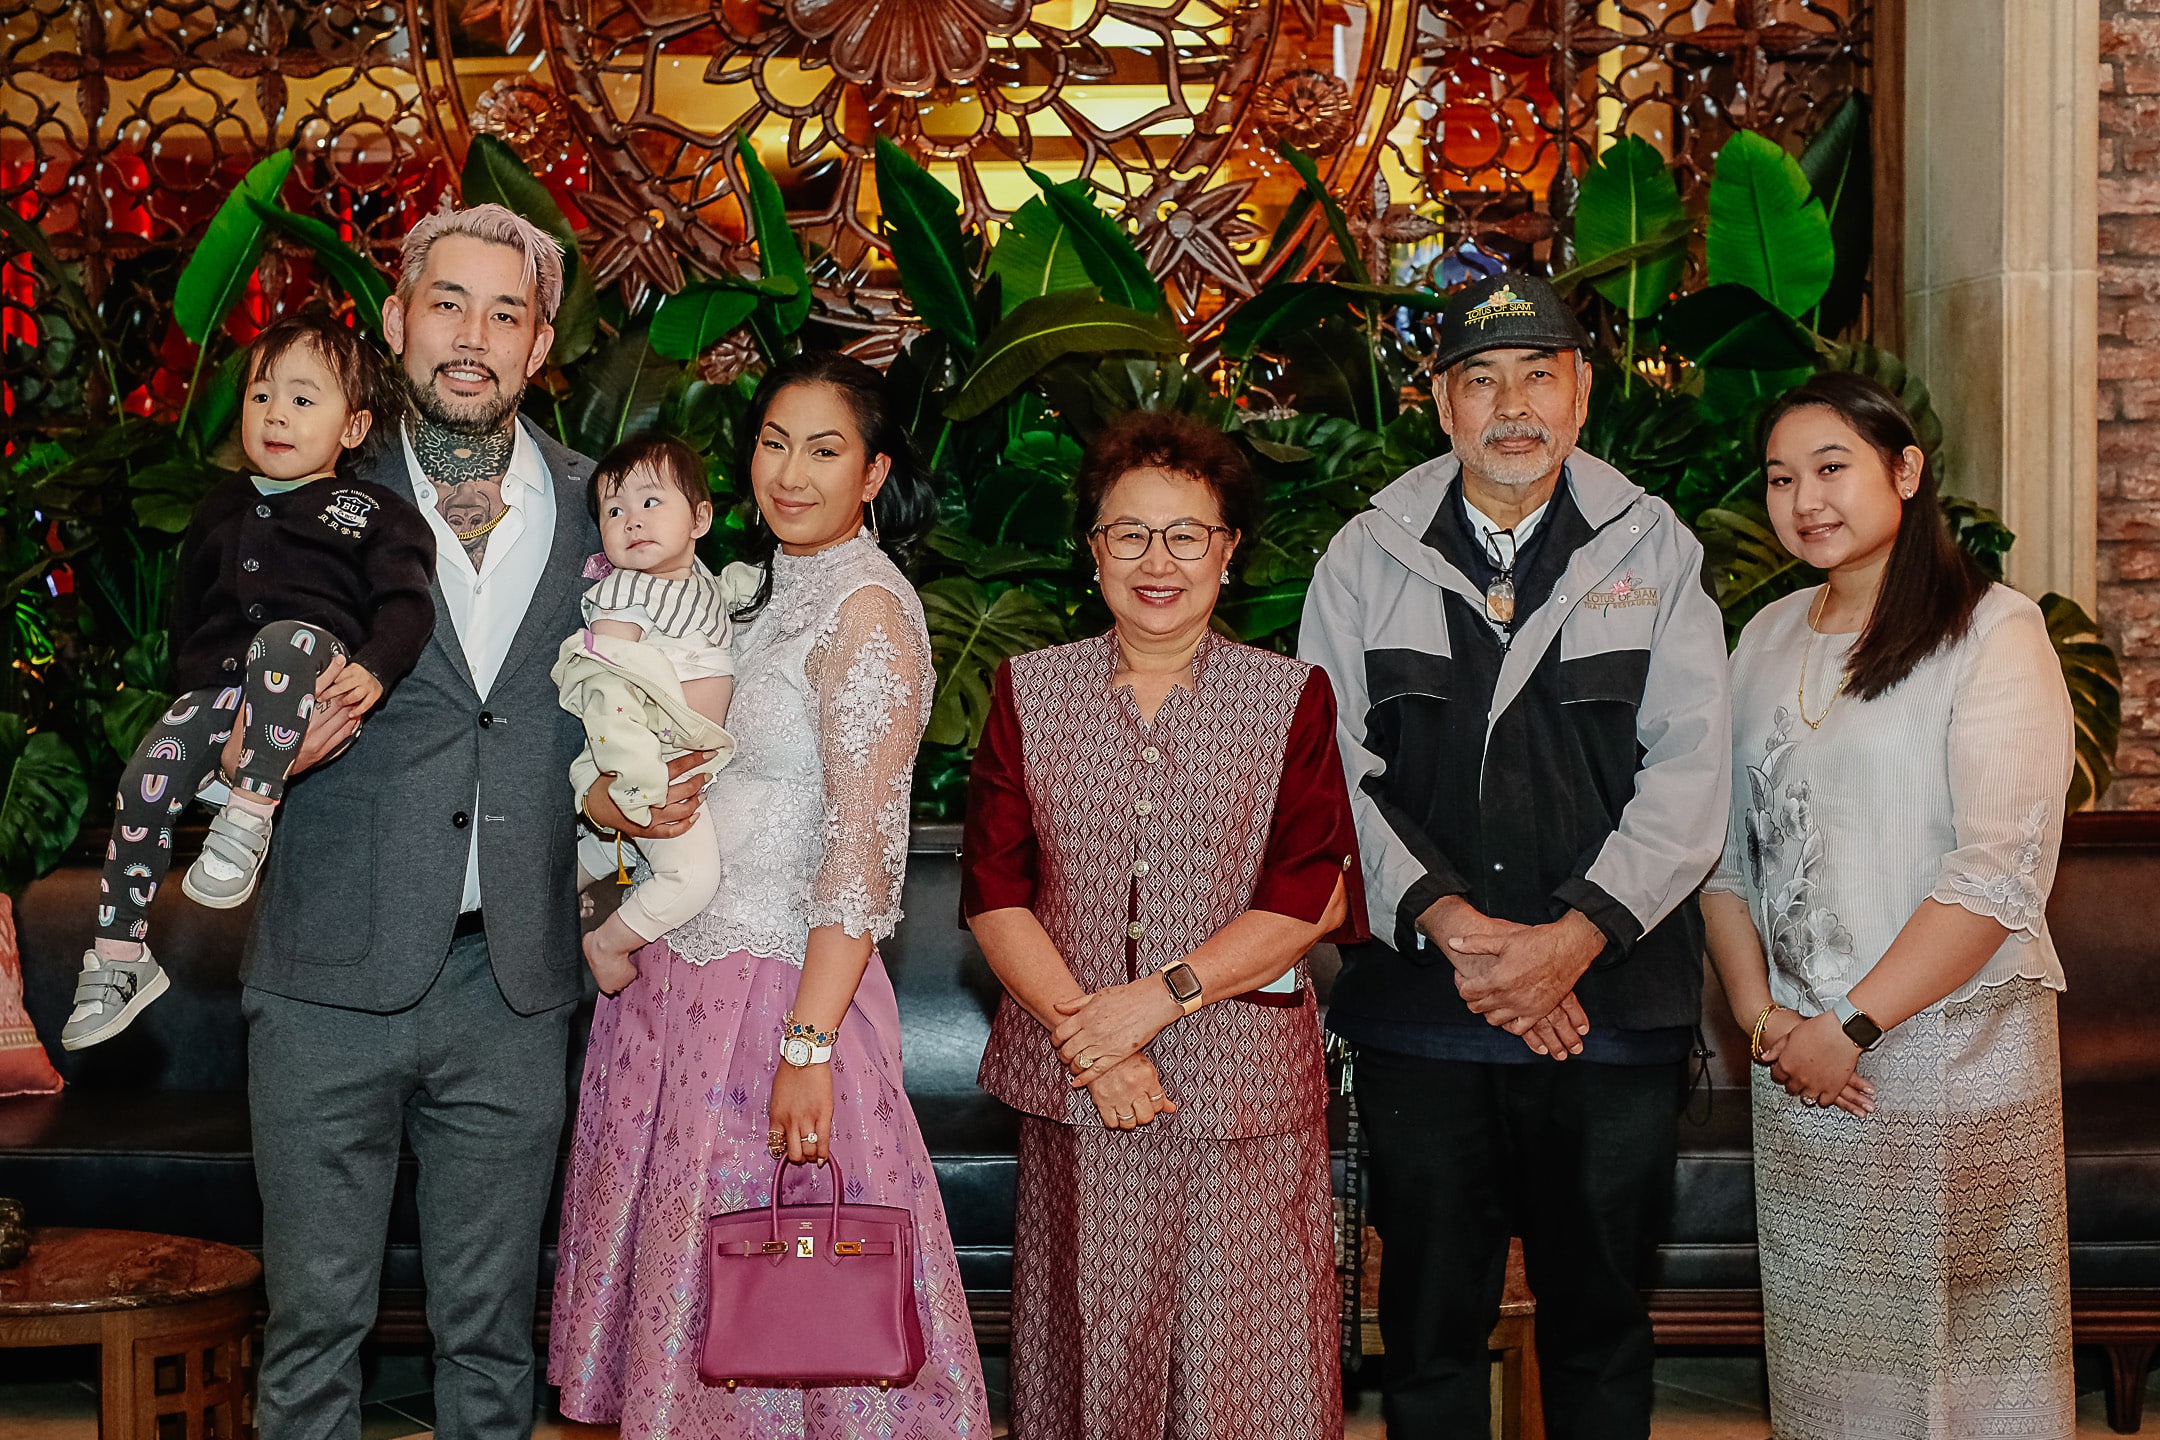 The Chutima family at the Grand Opening ceremony of Thai food restaurant, Lotus of Siam, inside Red Rock Resort Las Vegas